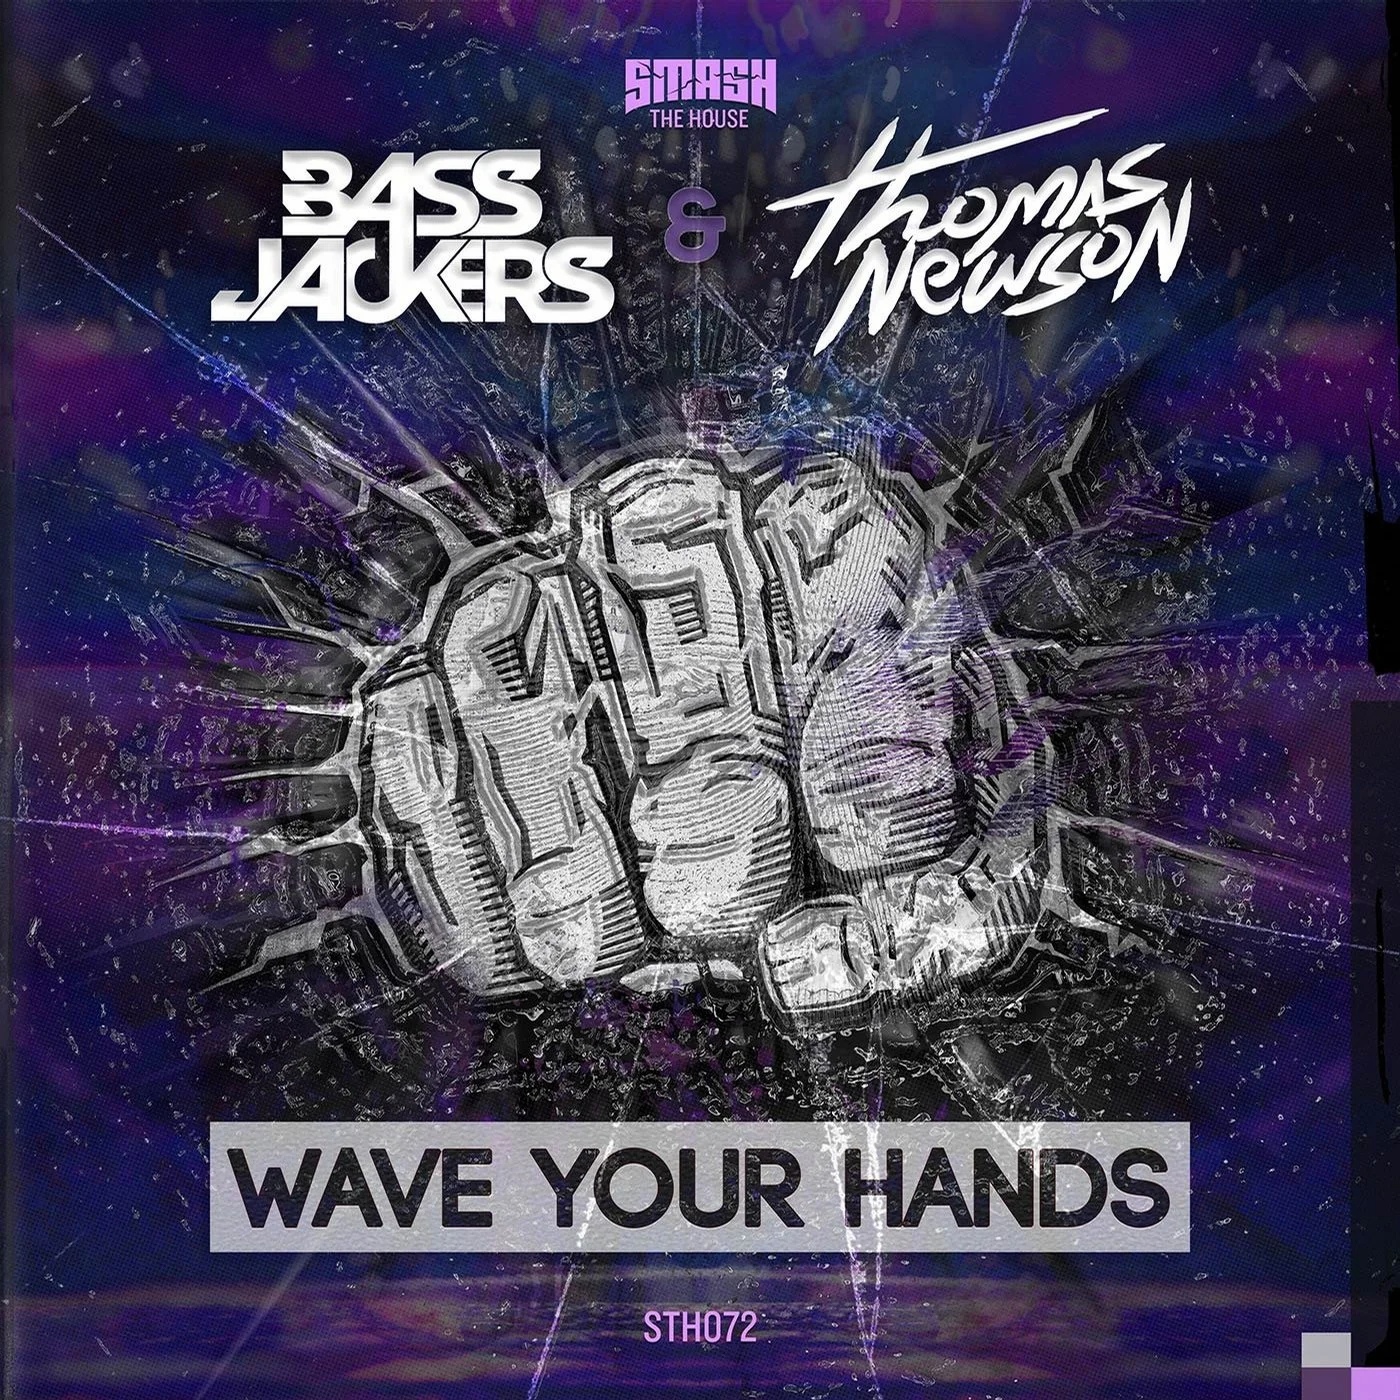 Bassjackers & Thomas Newson — Wave Your Hands cover artwork